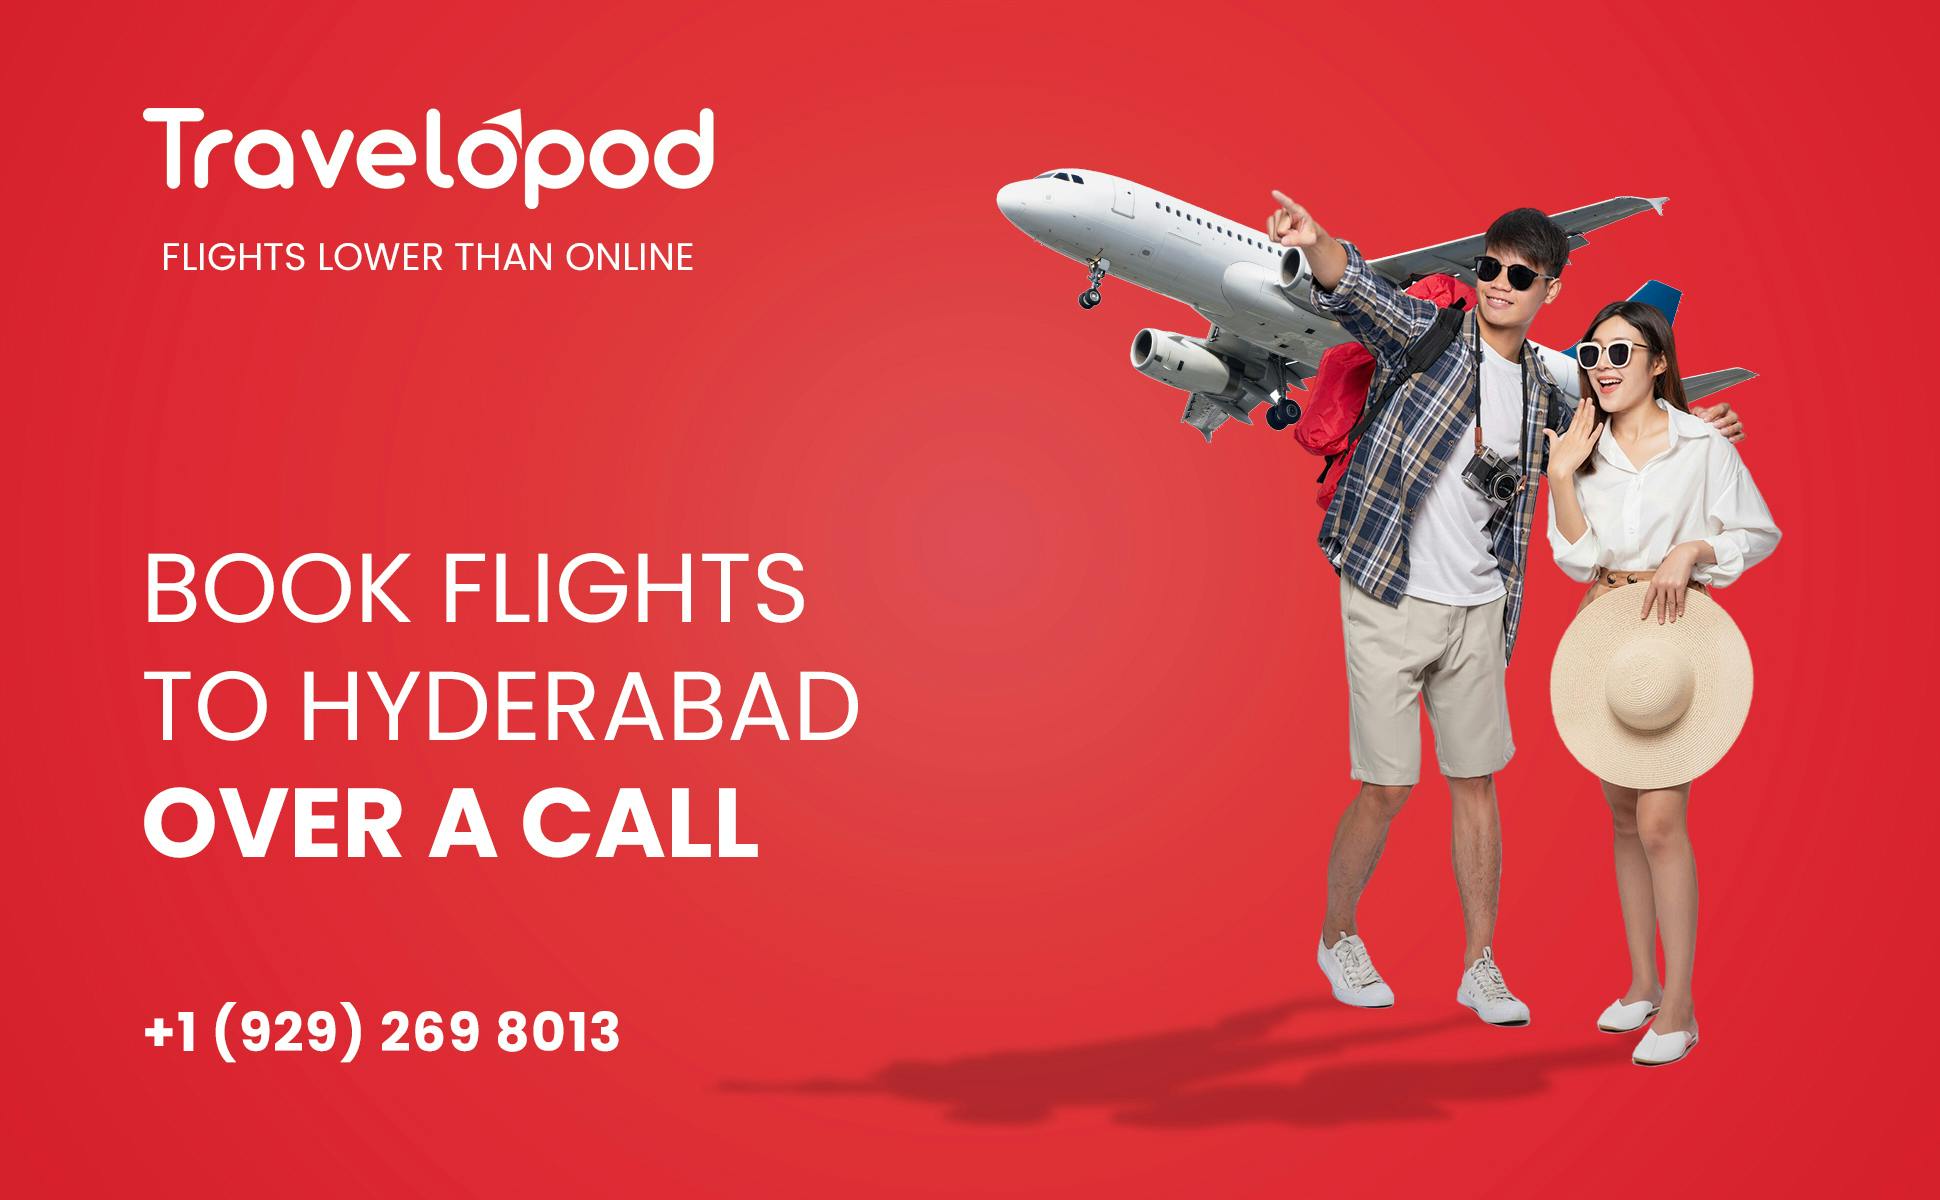 How to Book Flights to Hyderabad Over a Call? + Find Cheap Flight Tickets